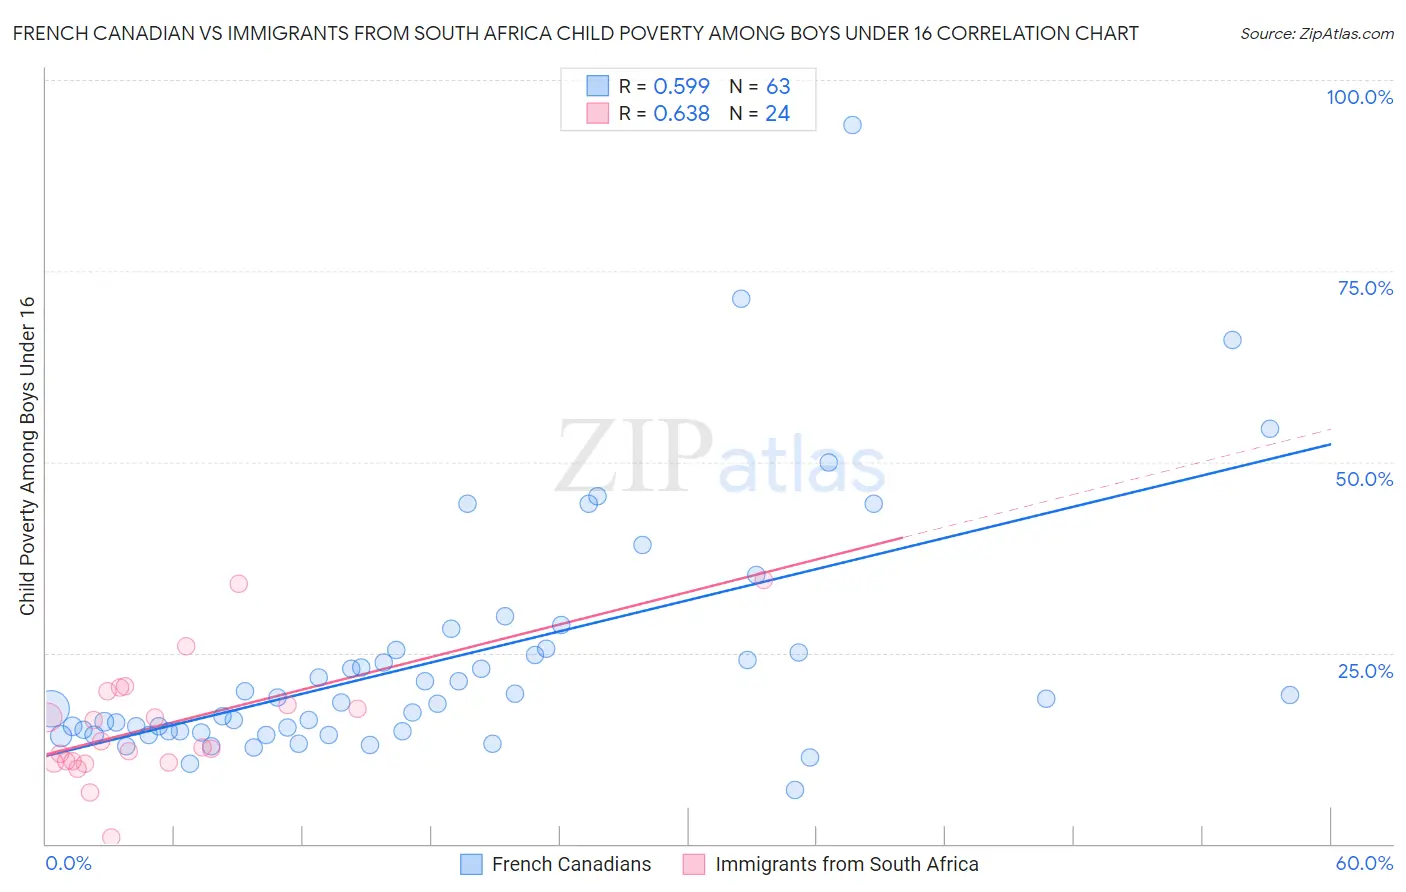 French Canadian vs Immigrants from South Africa Child Poverty Among Boys Under 16